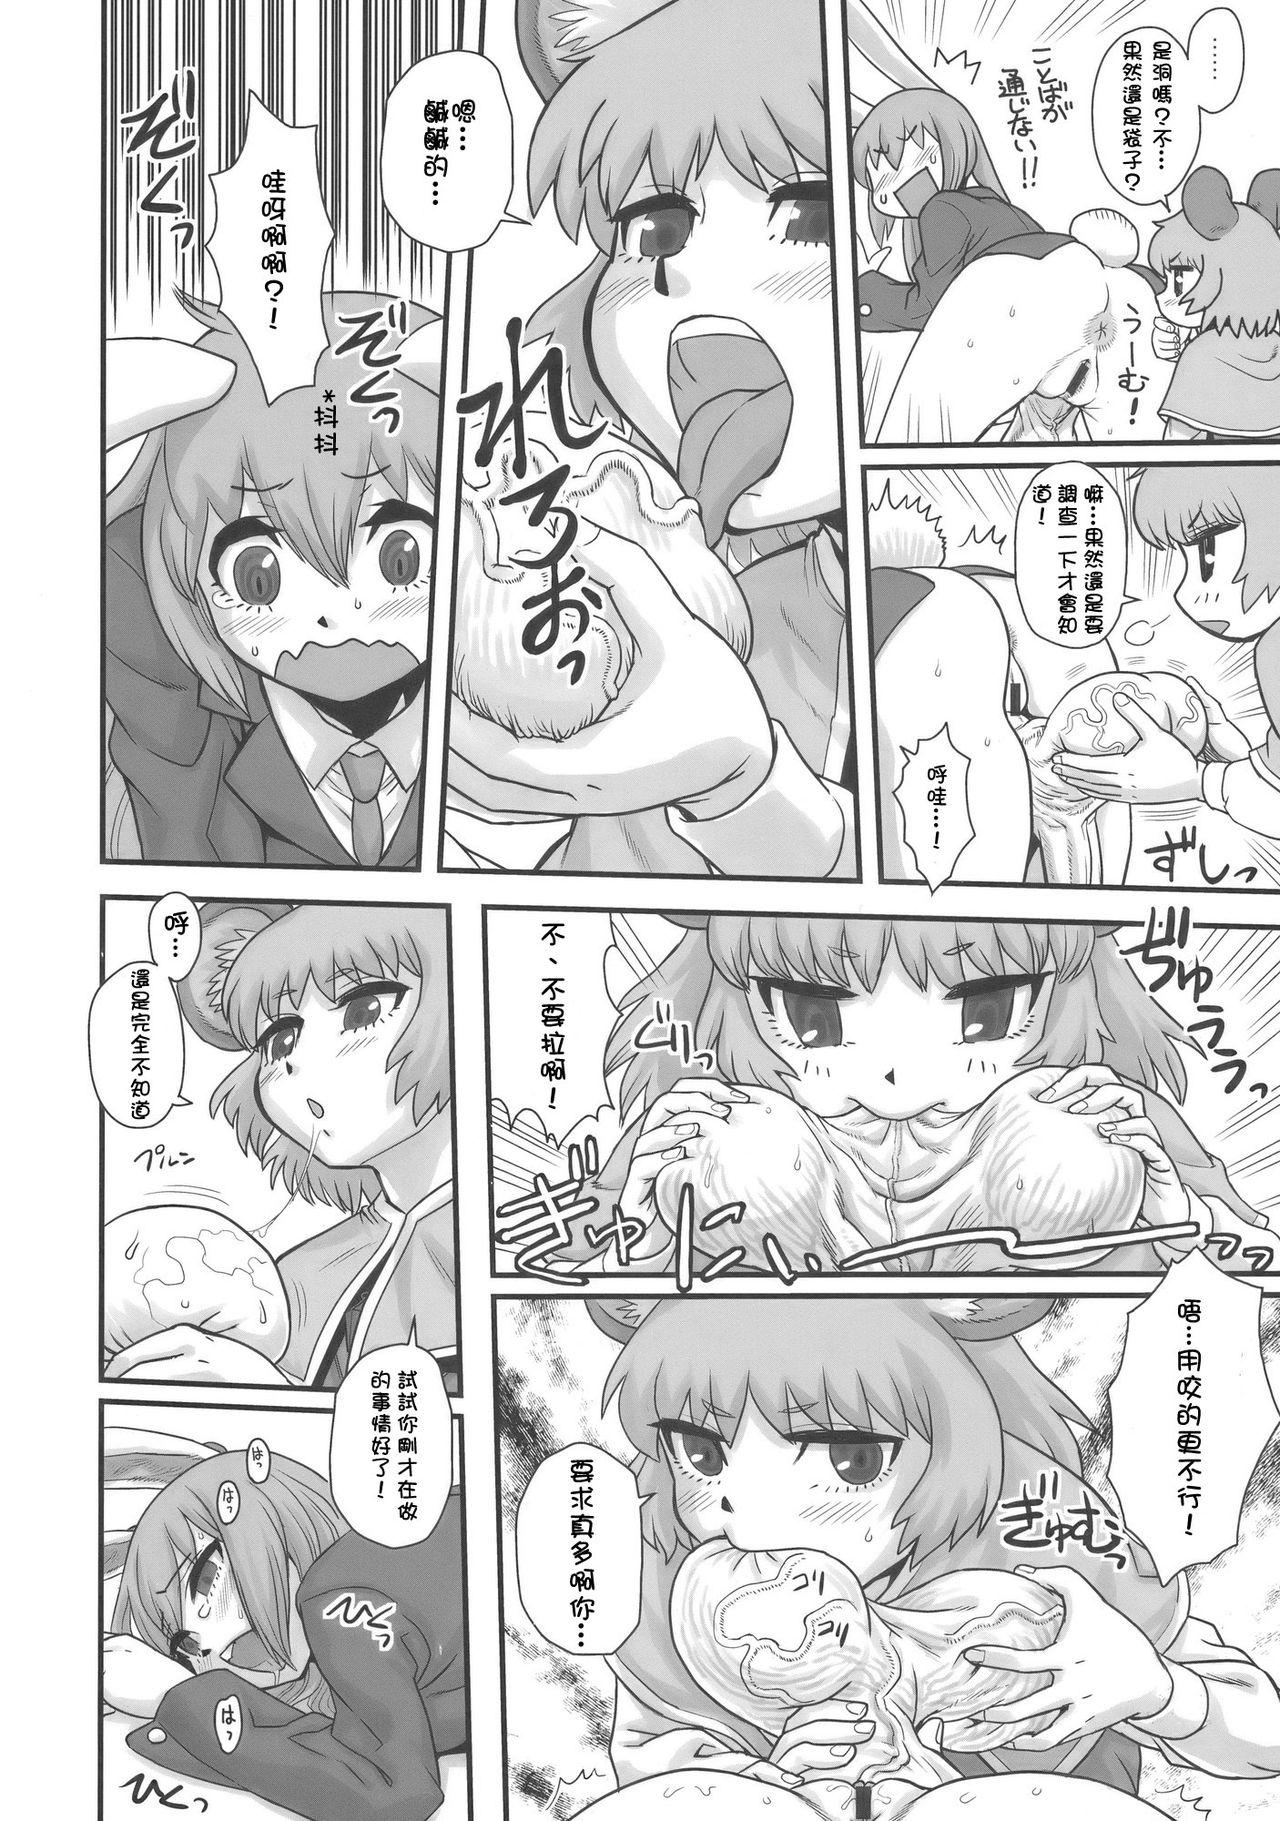 Hot Girl Fuck Lunatic Udon - Touhou project Full Movie - Page 8